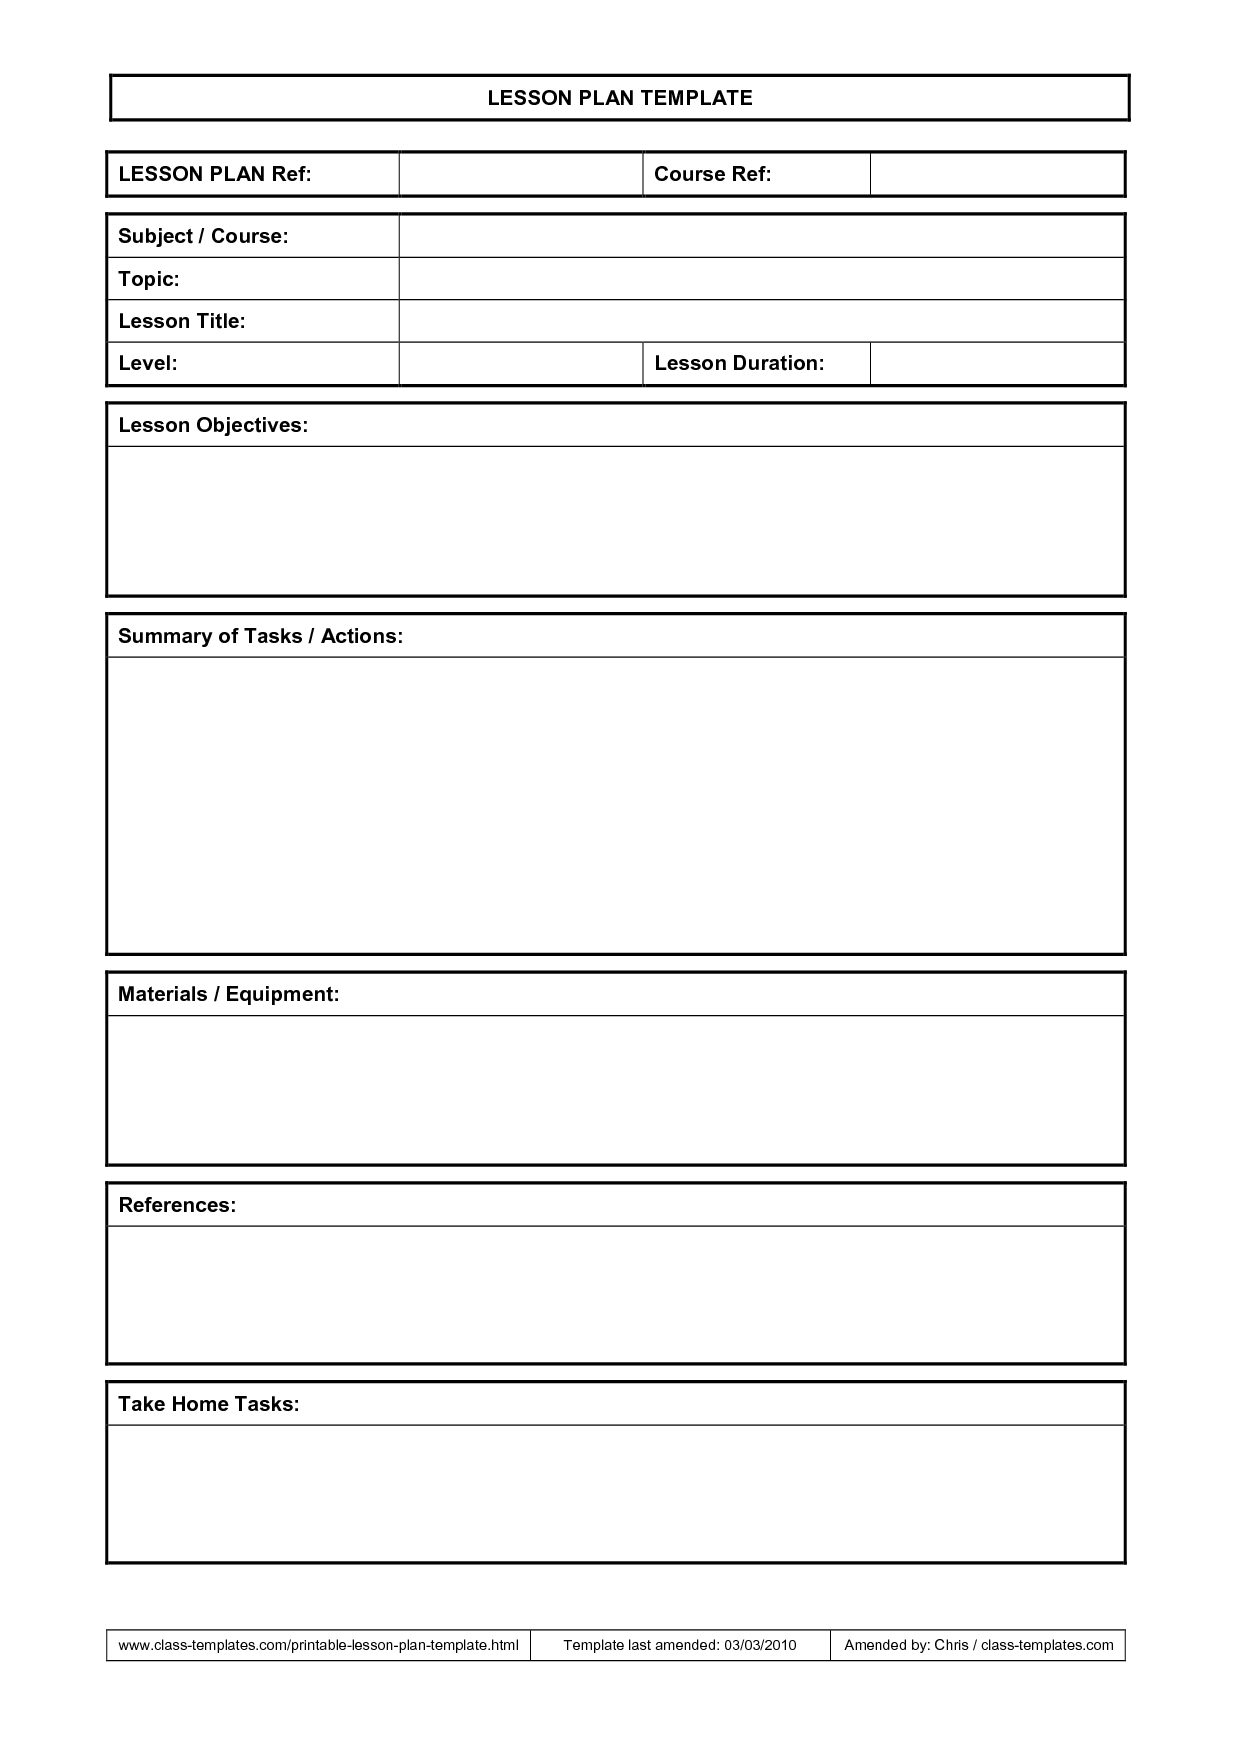 Lesson Plan Template Rich image and wallpaper